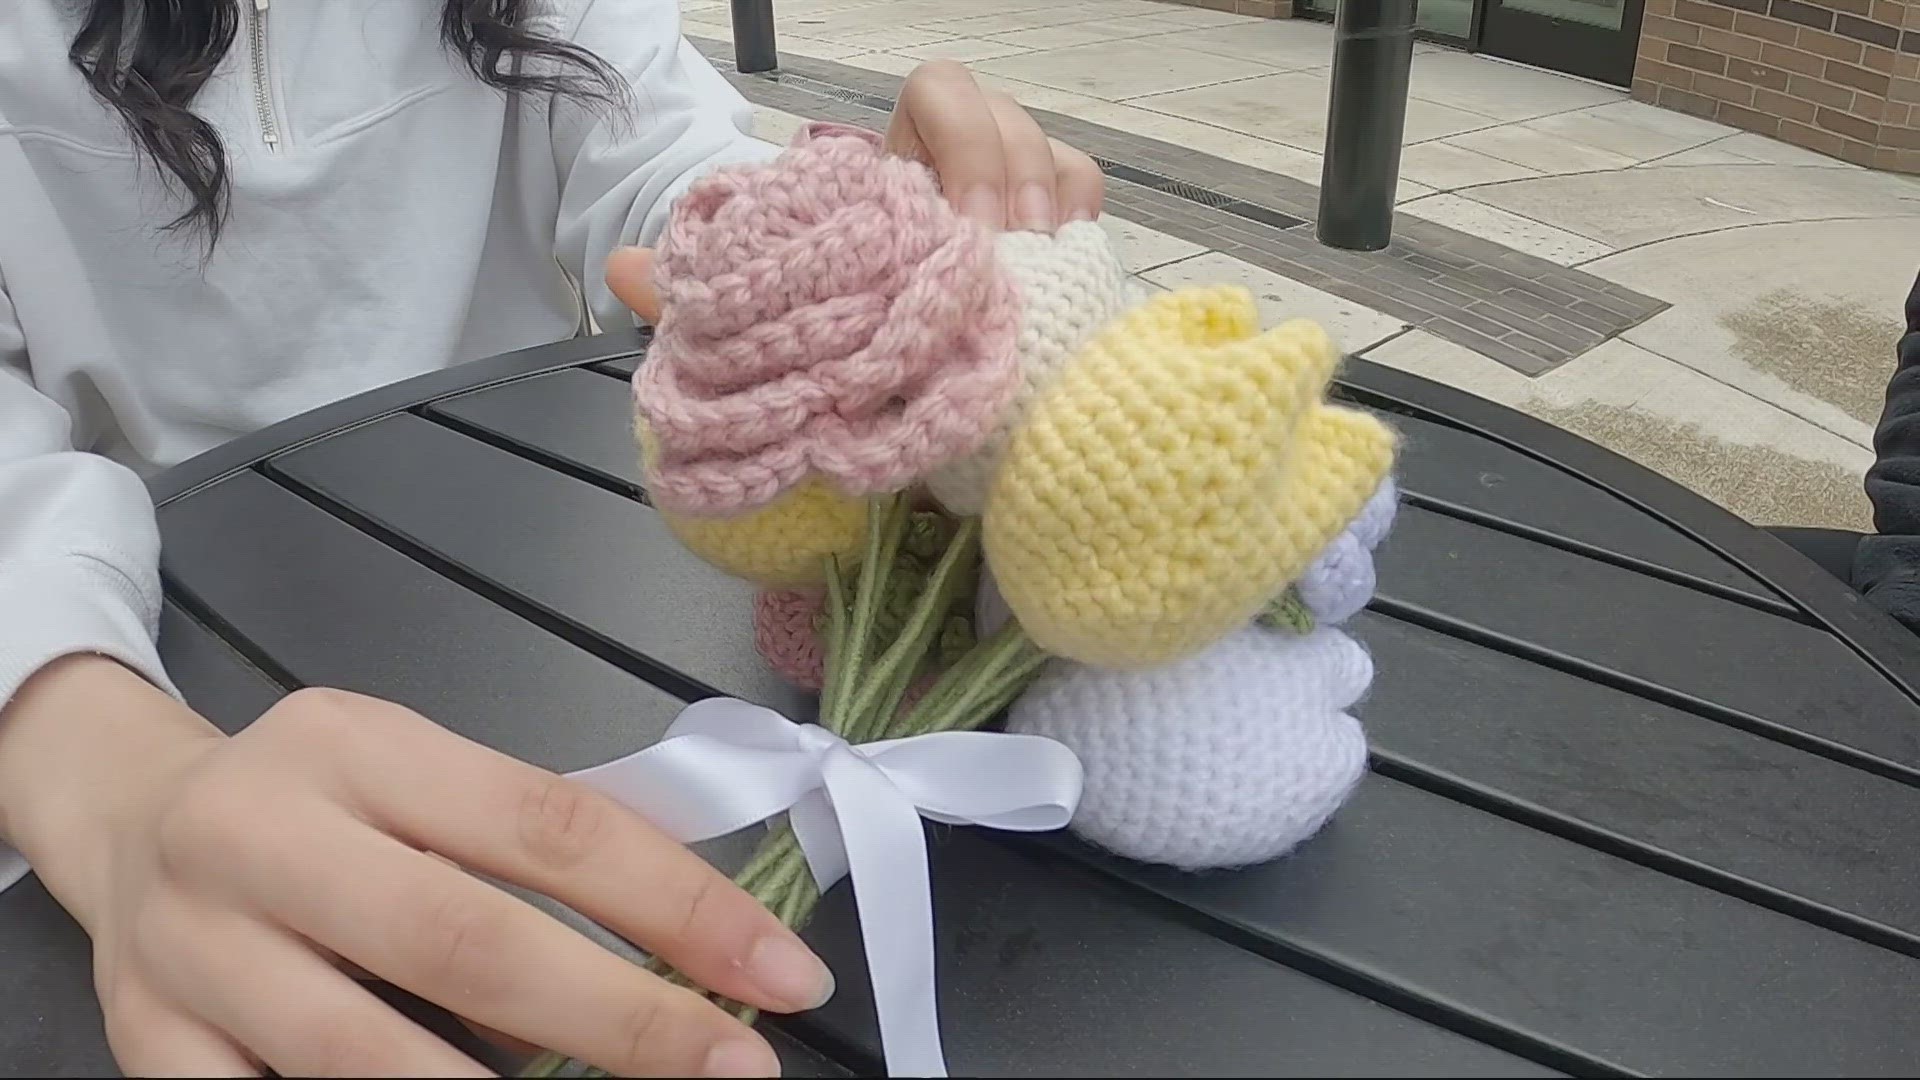 Students from Westview High School have a mission to plant one tree for every dollar earned through EnVi Crochet, a student-led flower crochet organization.